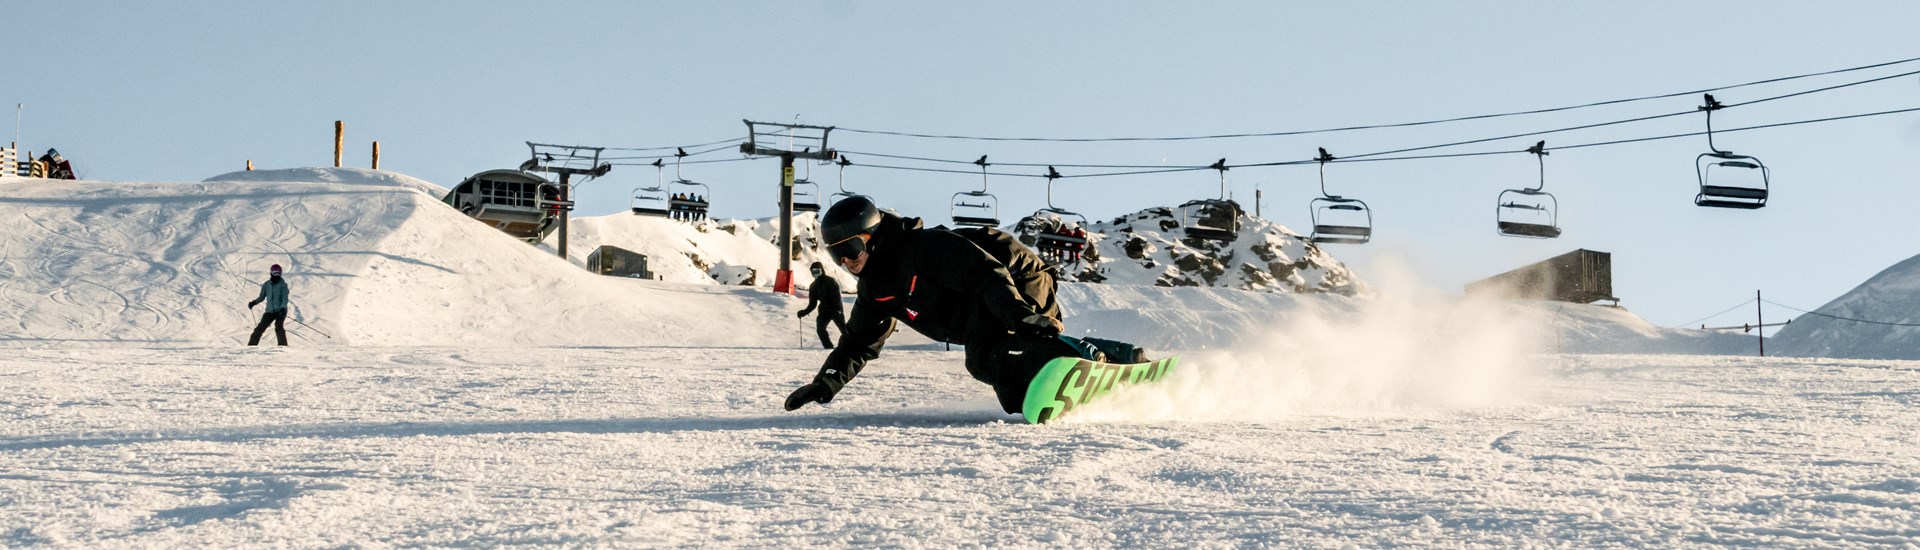 cardrona-snowboard-instructor-courses